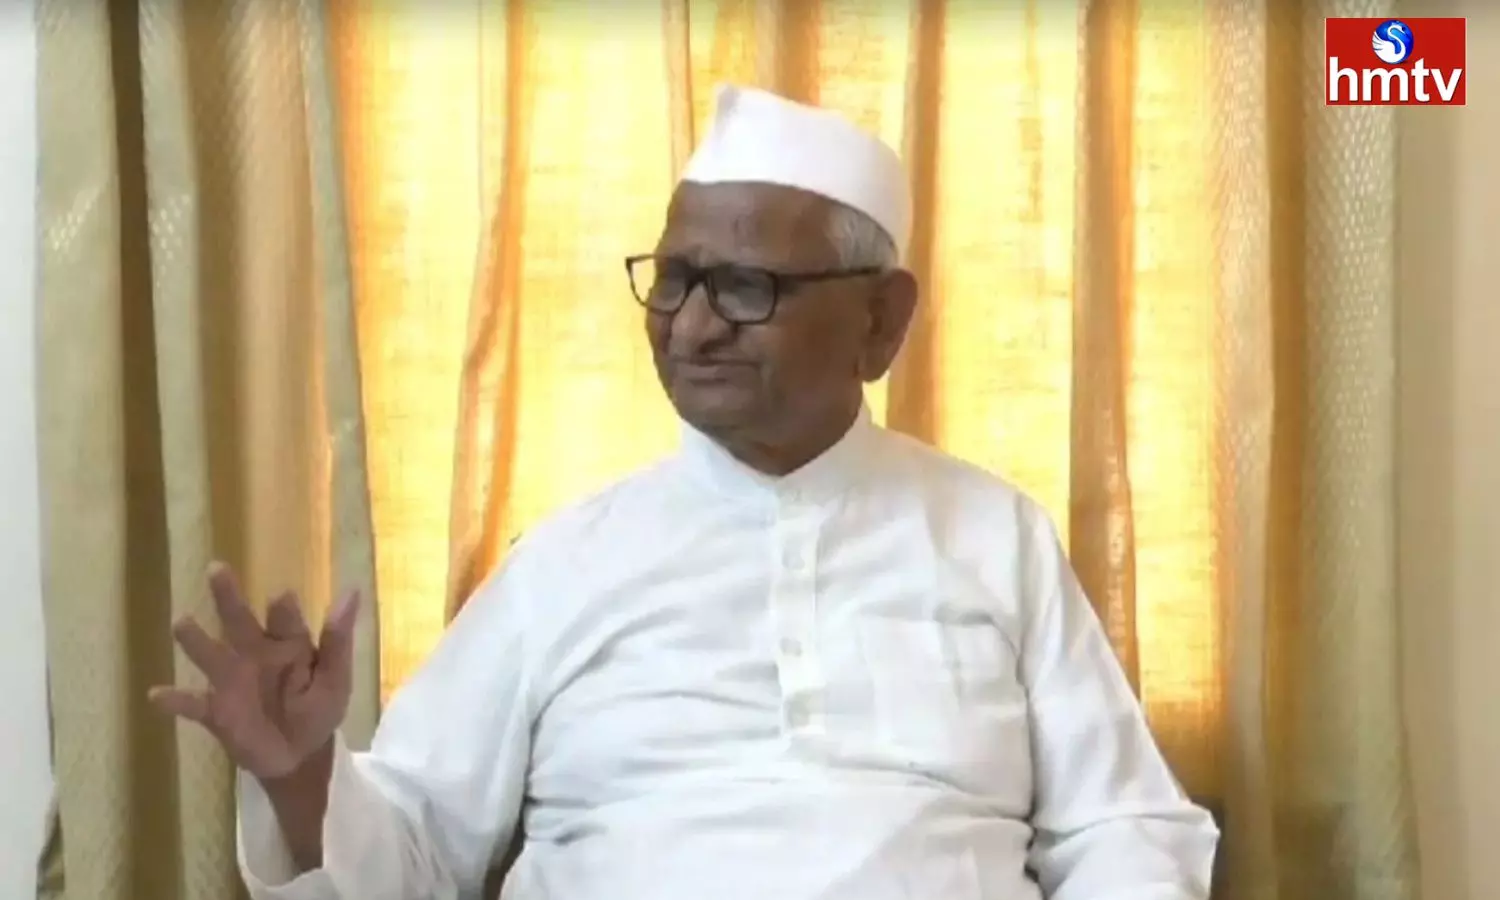 Anna Hazare Comments On Cm Arvind Kejriwal In Delhi Liquor Policy Case